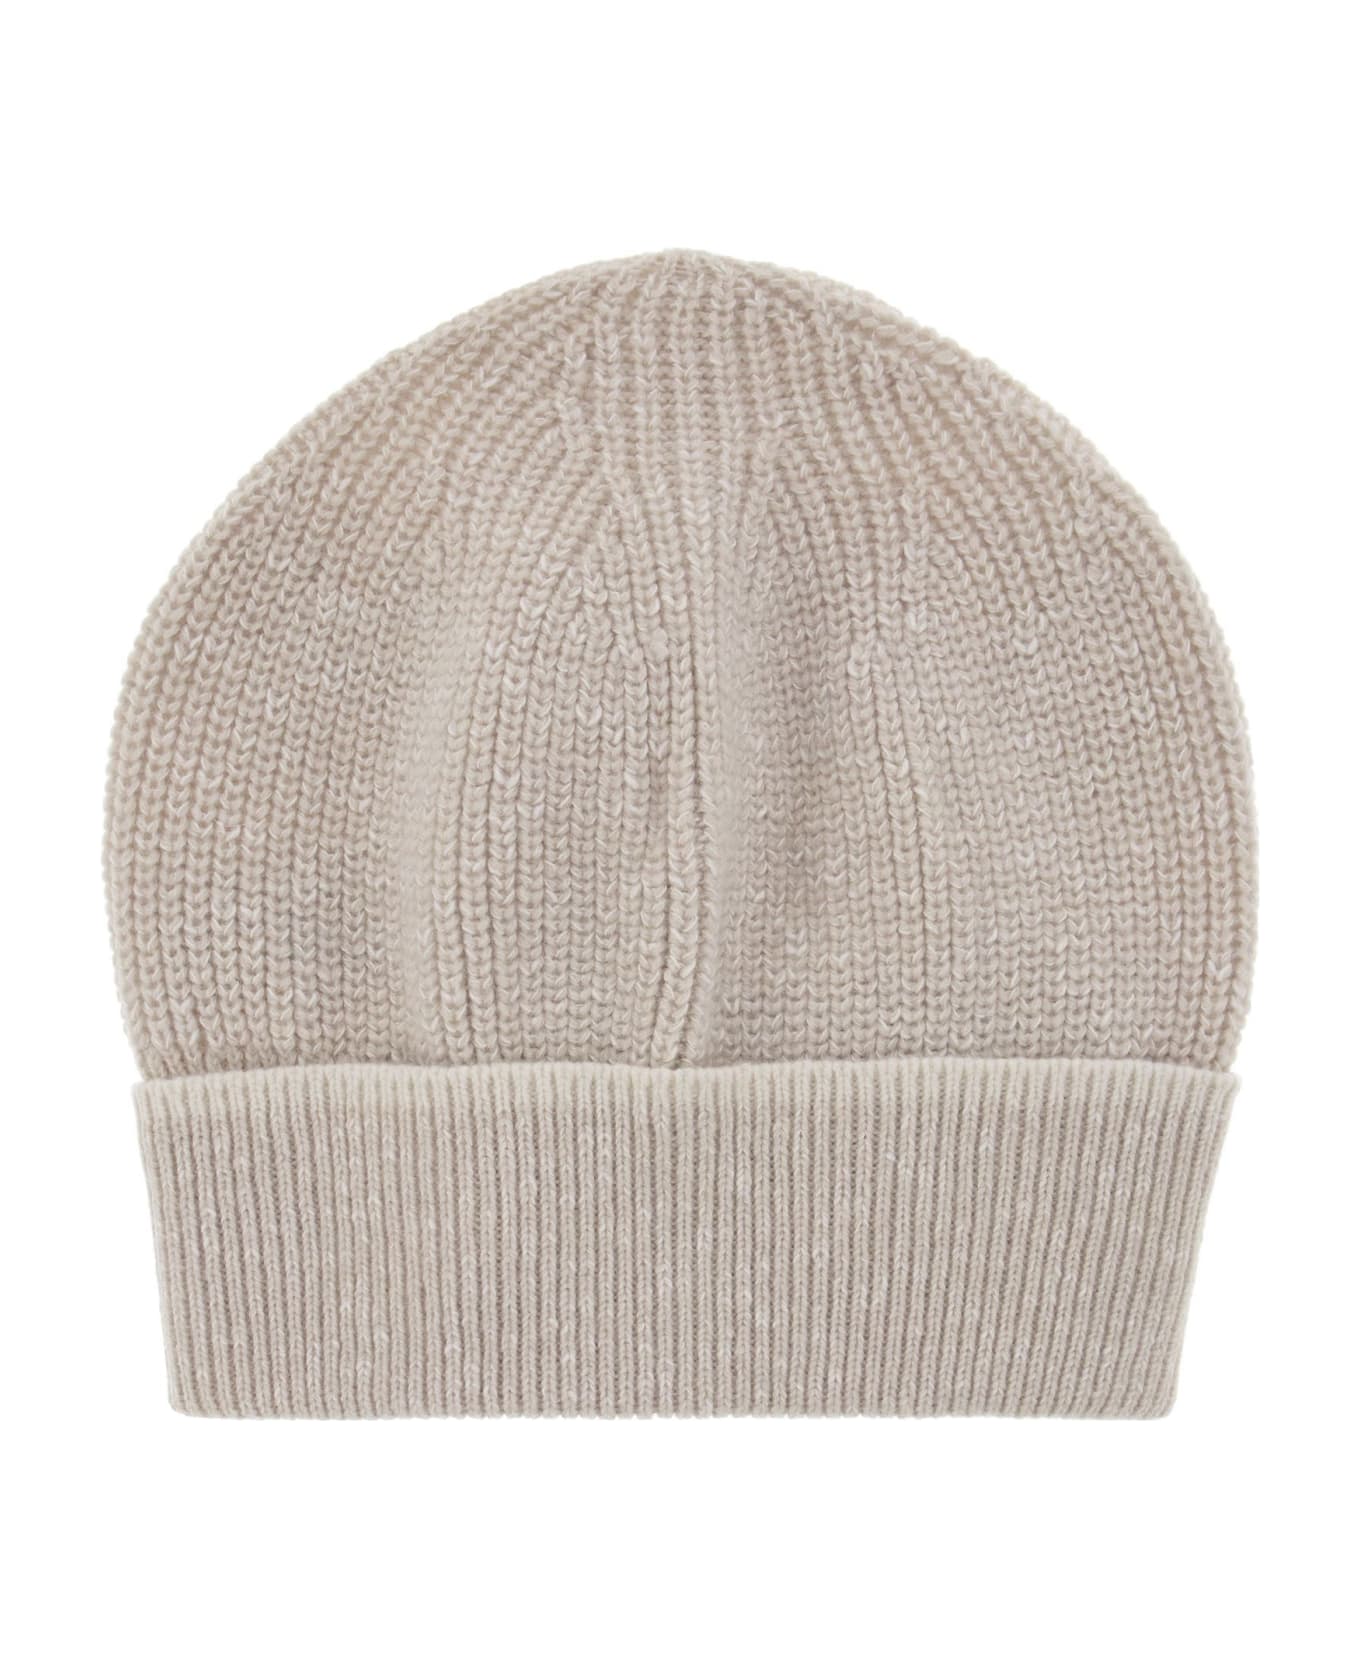 Peserico Wool And Cashmere Cap - Beige